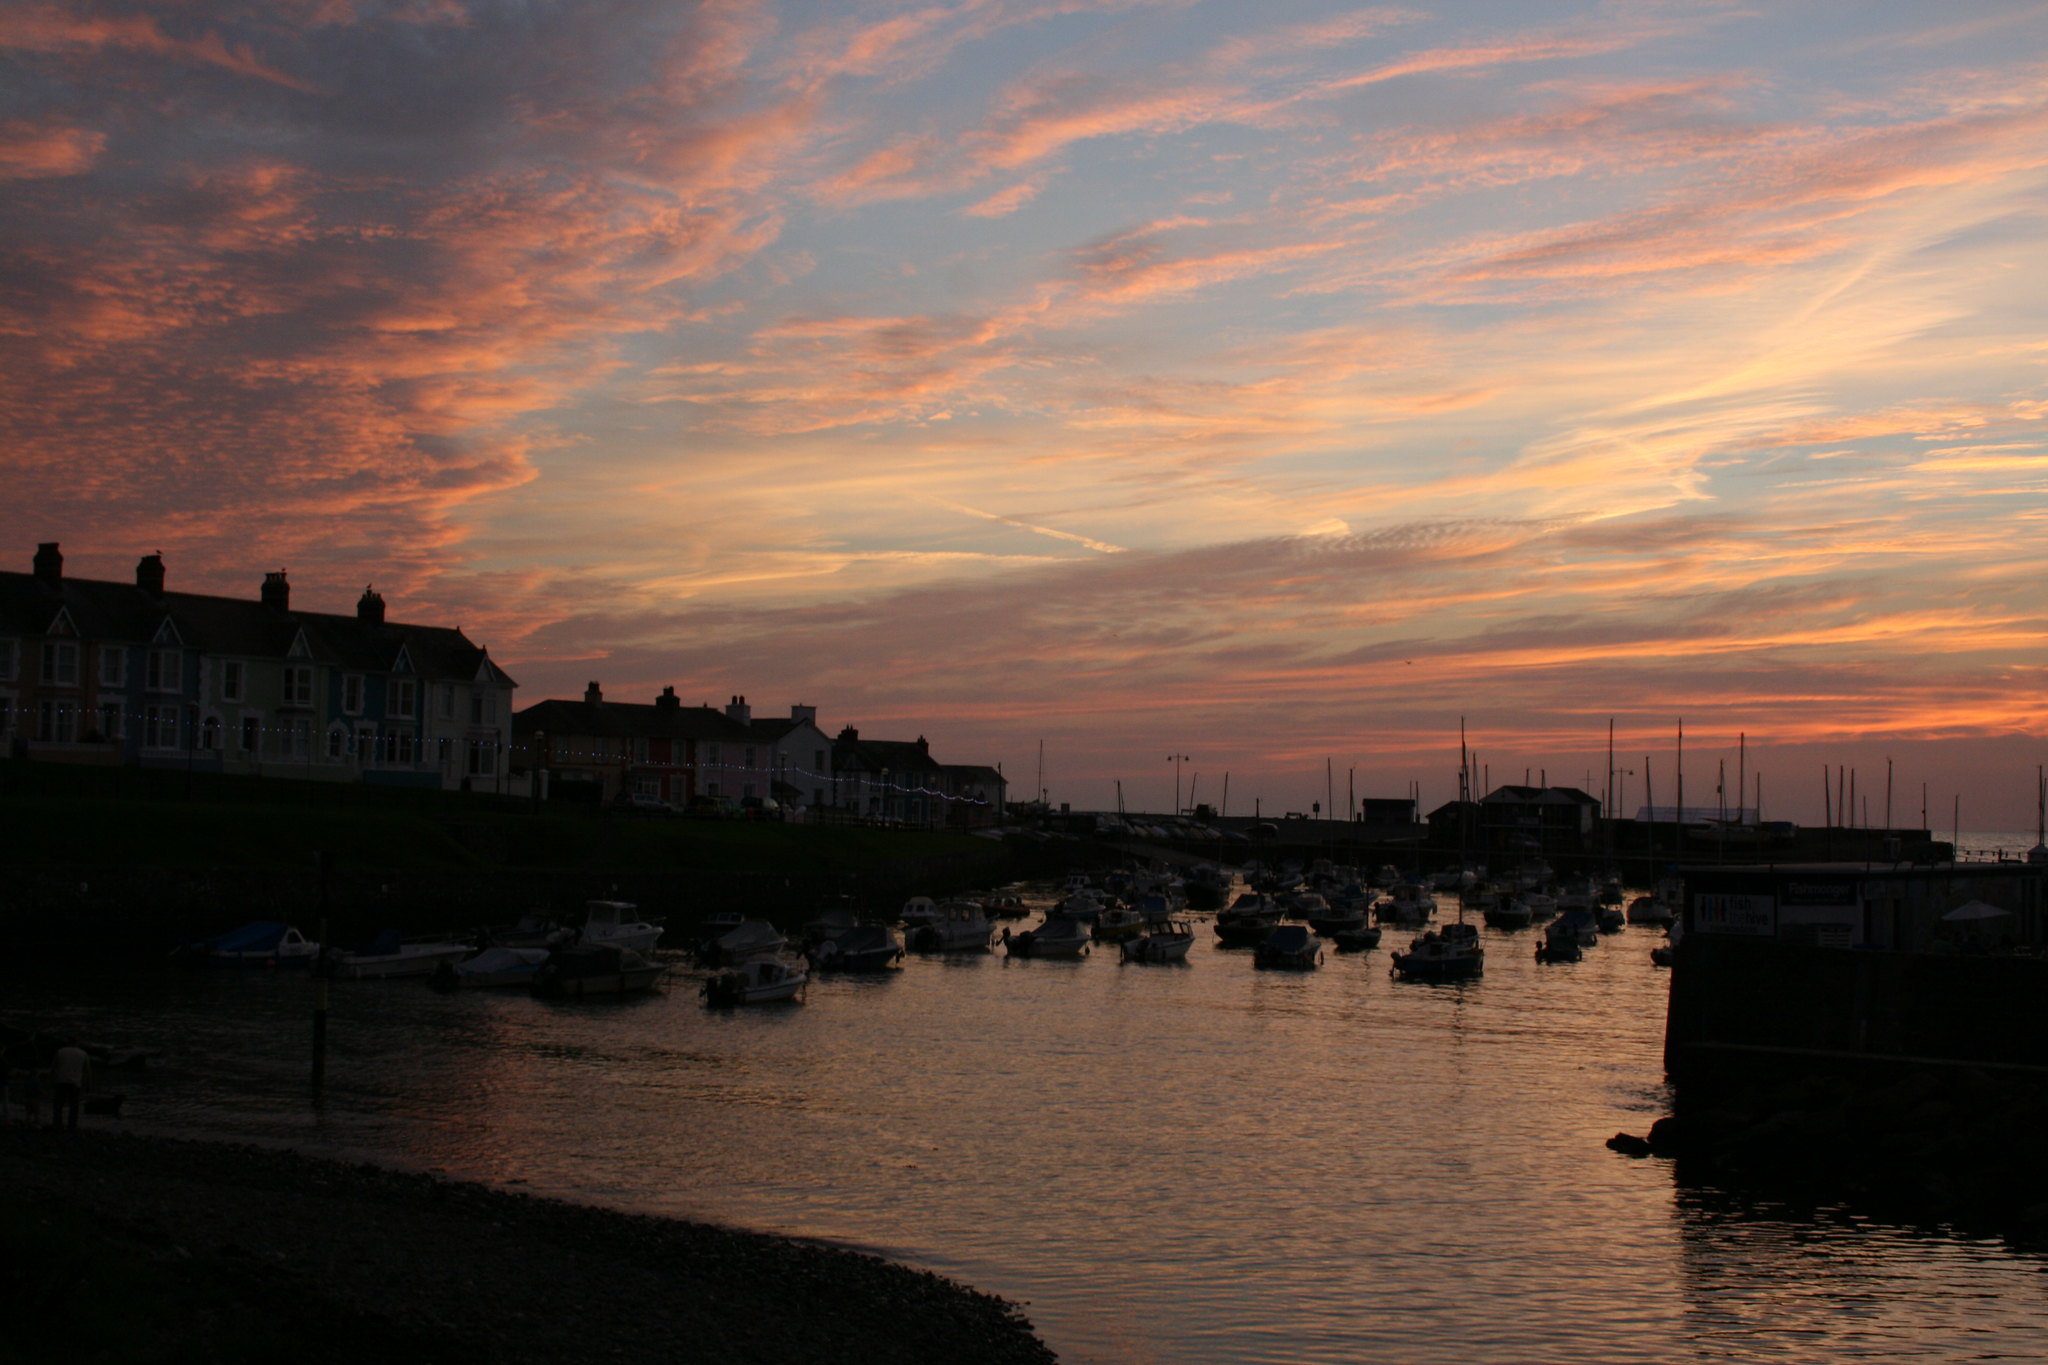 "Aberaeron, Ceredigion" by Dai Lygad is licensed under CC BY 2.0. To view a copy of this license, visit https://creativecommons.org/licenses/by/2.0/?ref=openverse.